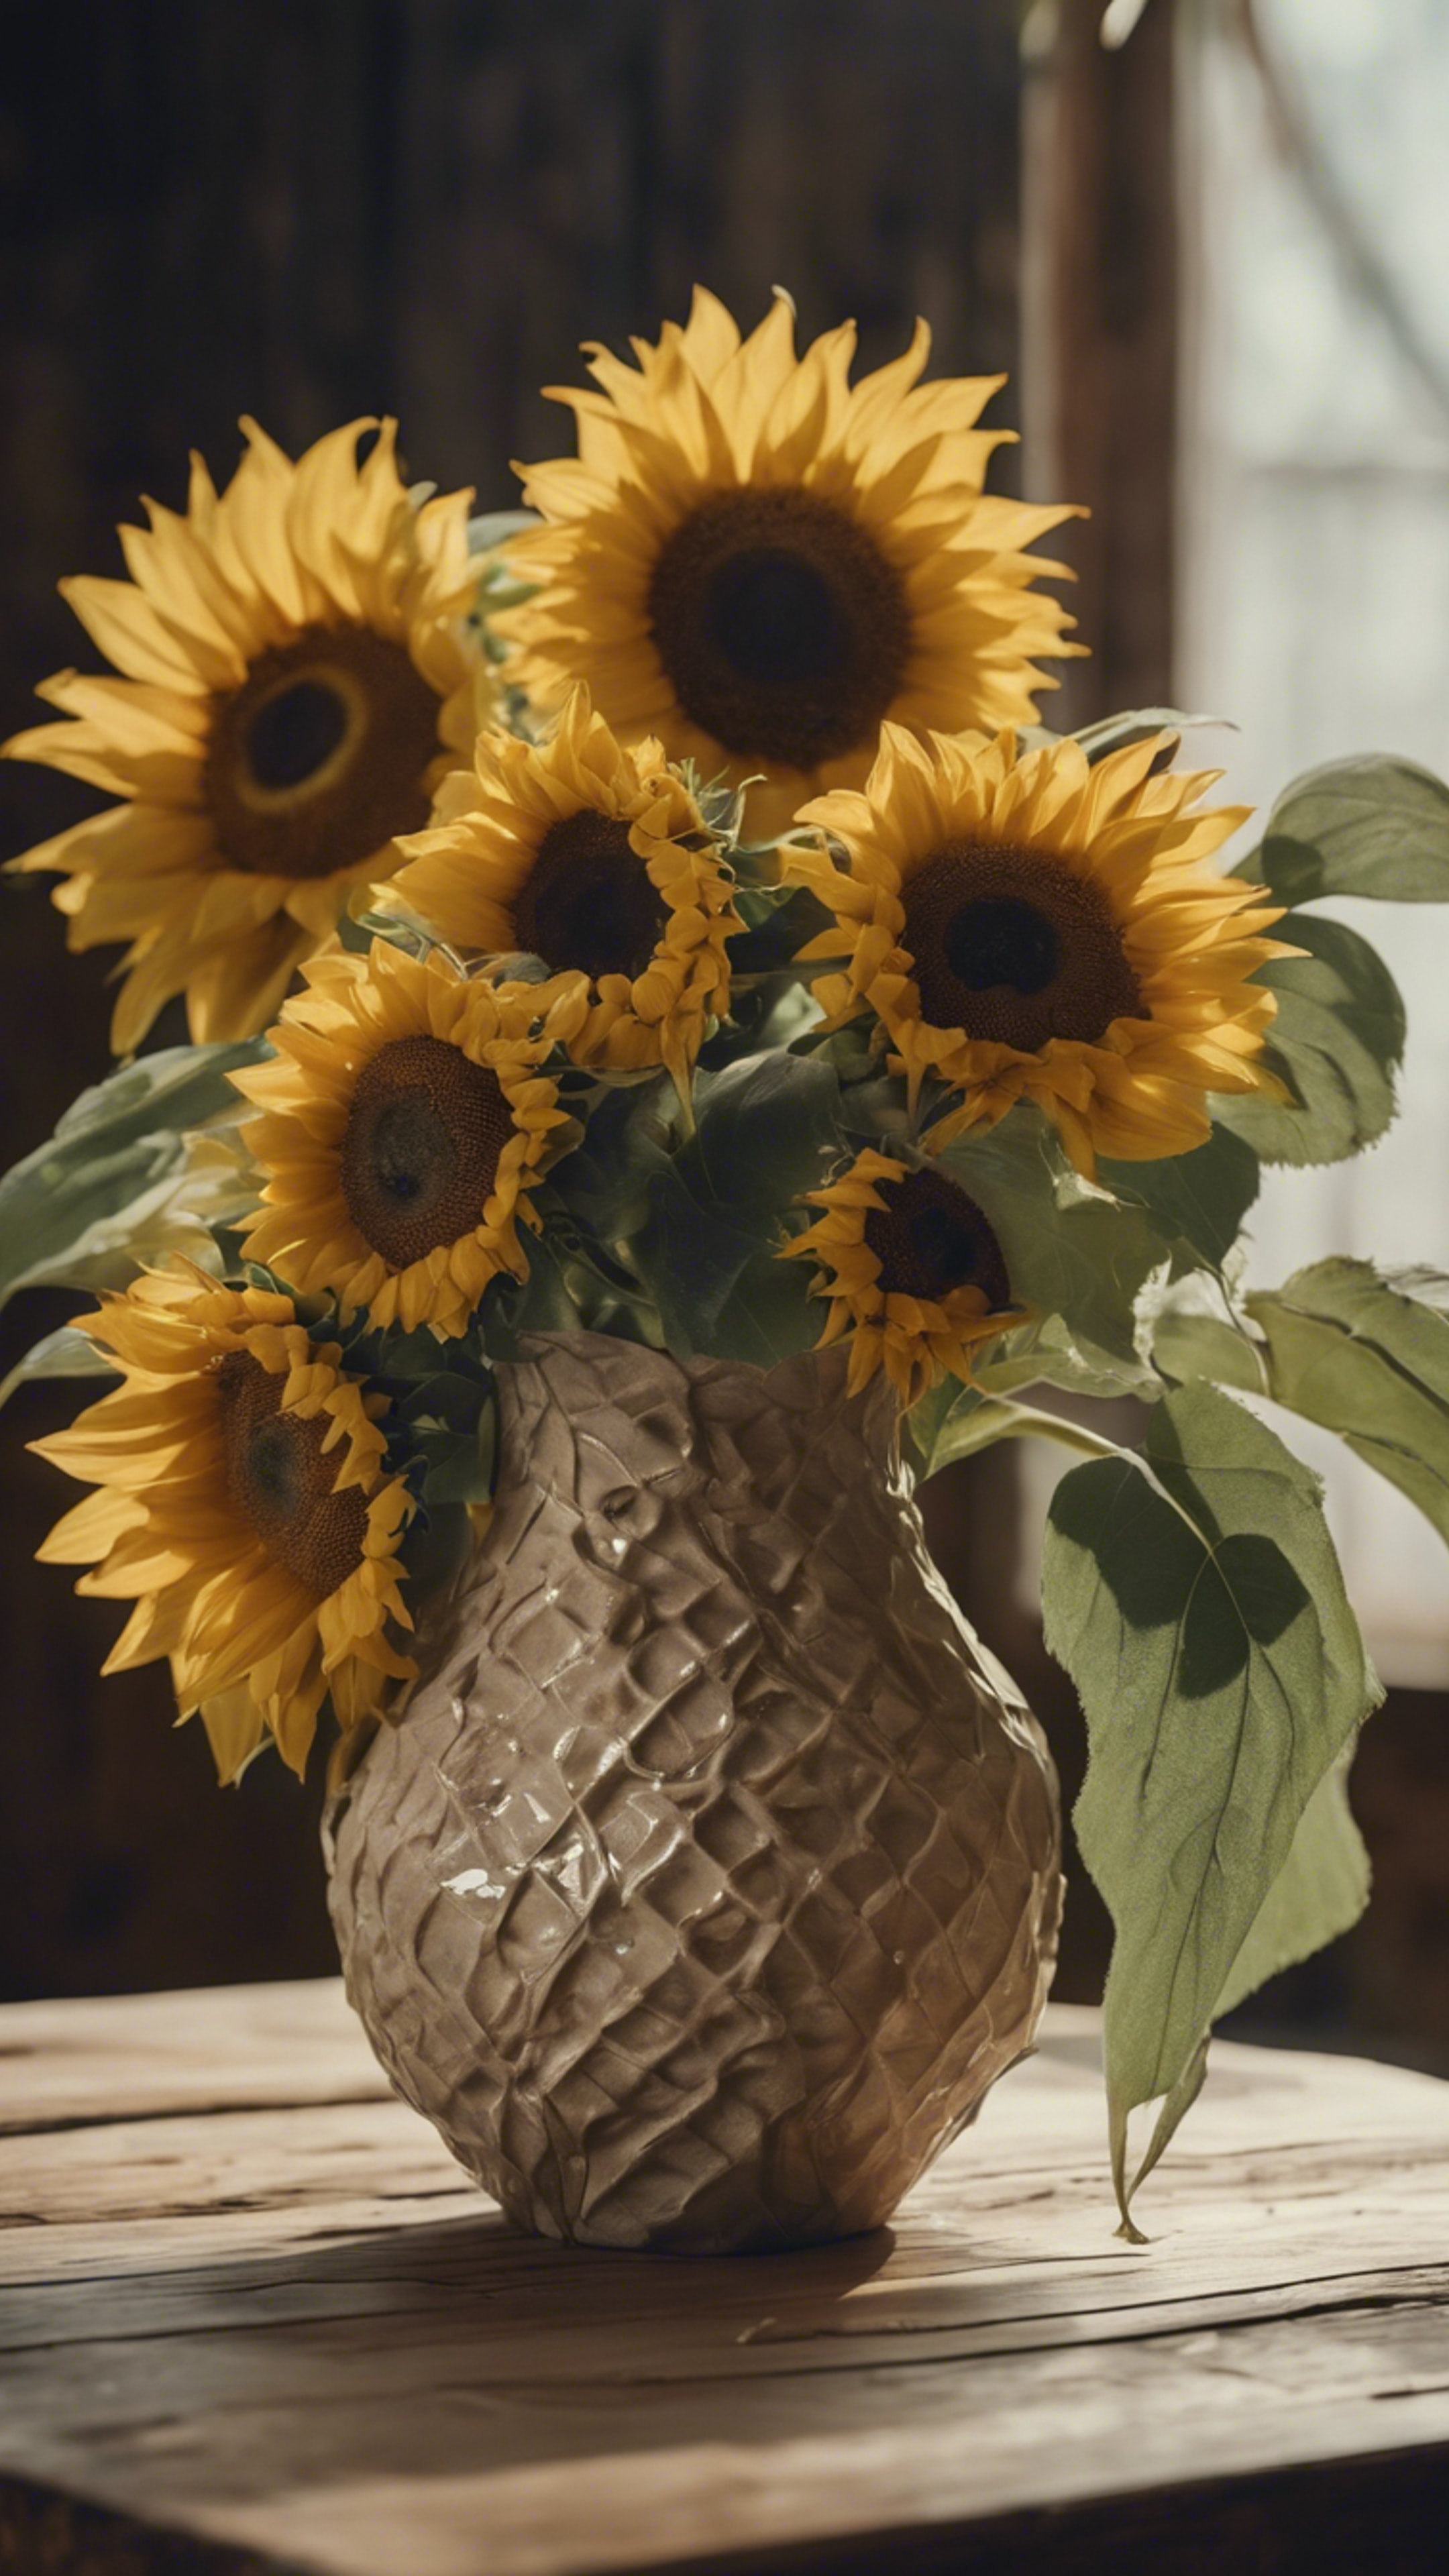 A close-up of a modern textured ceramic vase filled with fresh sunflowers on a rustic wooden table Wallpaper[ef74c033c0f846bba371]